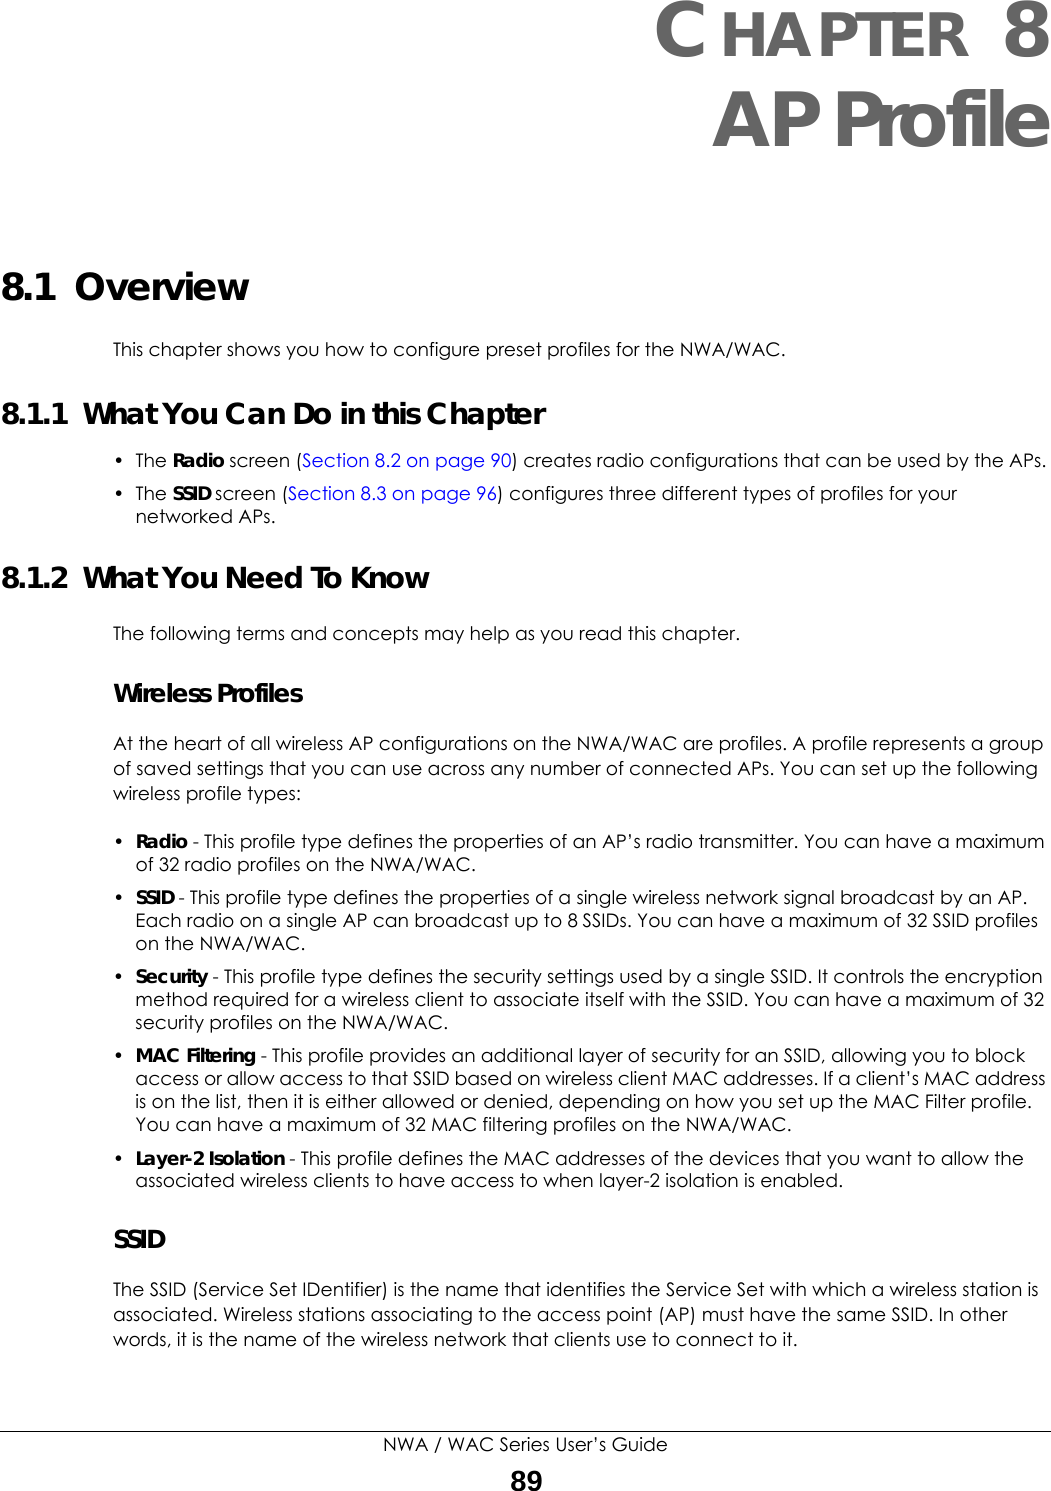 NWA / WAC Series User’s Guide89CHAPTER 8AP Profile8.1  OverviewThis chapter shows you how to configure preset profiles for the NWA/WAC. 8.1.1  What You Can Do in this Chapter• The Radio screen (Section 8.2 on page 90) creates radio configurations that can be used by the APs.• The SSID screen (Section 8.3 on page 96) configures three different types of profiles for your networked APs.8.1.2  What You Need To KnowThe following terms and concepts may help as you read this chapter.Wireless ProfilesAt the heart of all wireless AP configurations on the NWA/WAC are profiles. A profile represents a group of saved settings that you can use across any number of connected APs. You can set up the following wireless profile types:•Radio - This profile type defines the properties of an AP’s radio transmitter. You can have a maximum of 32 radio profiles on the NWA/WAC.•SSID - This profile type defines the properties of a single wireless network signal broadcast by an AP. Each radio on a single AP can broadcast up to 8 SSIDs. You can have a maximum of 32 SSID profiles on the NWA/WAC.•Security - This profile type defines the security settings used by a single SSID. It controls the encryption method required for a wireless client to associate itself with the SSID. You can have a maximum of 32 security profiles on the NWA/WAC.•MAC Filtering - This profile provides an additional layer of security for an SSID, allowing you to block access or allow access to that SSID based on wireless client MAC addresses. If a client’s MAC address is on the list, then it is either allowed or denied, depending on how you set up the MAC Filter profile. You can have a maximum of 32 MAC filtering profiles on the NWA/WAC.•Layer-2 Isolation - This profile defines the MAC addresses of the devices that you want to allow the associated wireless clients to have access to when layer-2 isolation is enabled. SSIDThe SSID (Service Set IDentifier) is the name that identifies the Service Set with which a wireless station is associated. Wireless stations associating to the access point (AP) must have the same SSID. In other words, it is the name of the wireless network that clients use to connect to it.